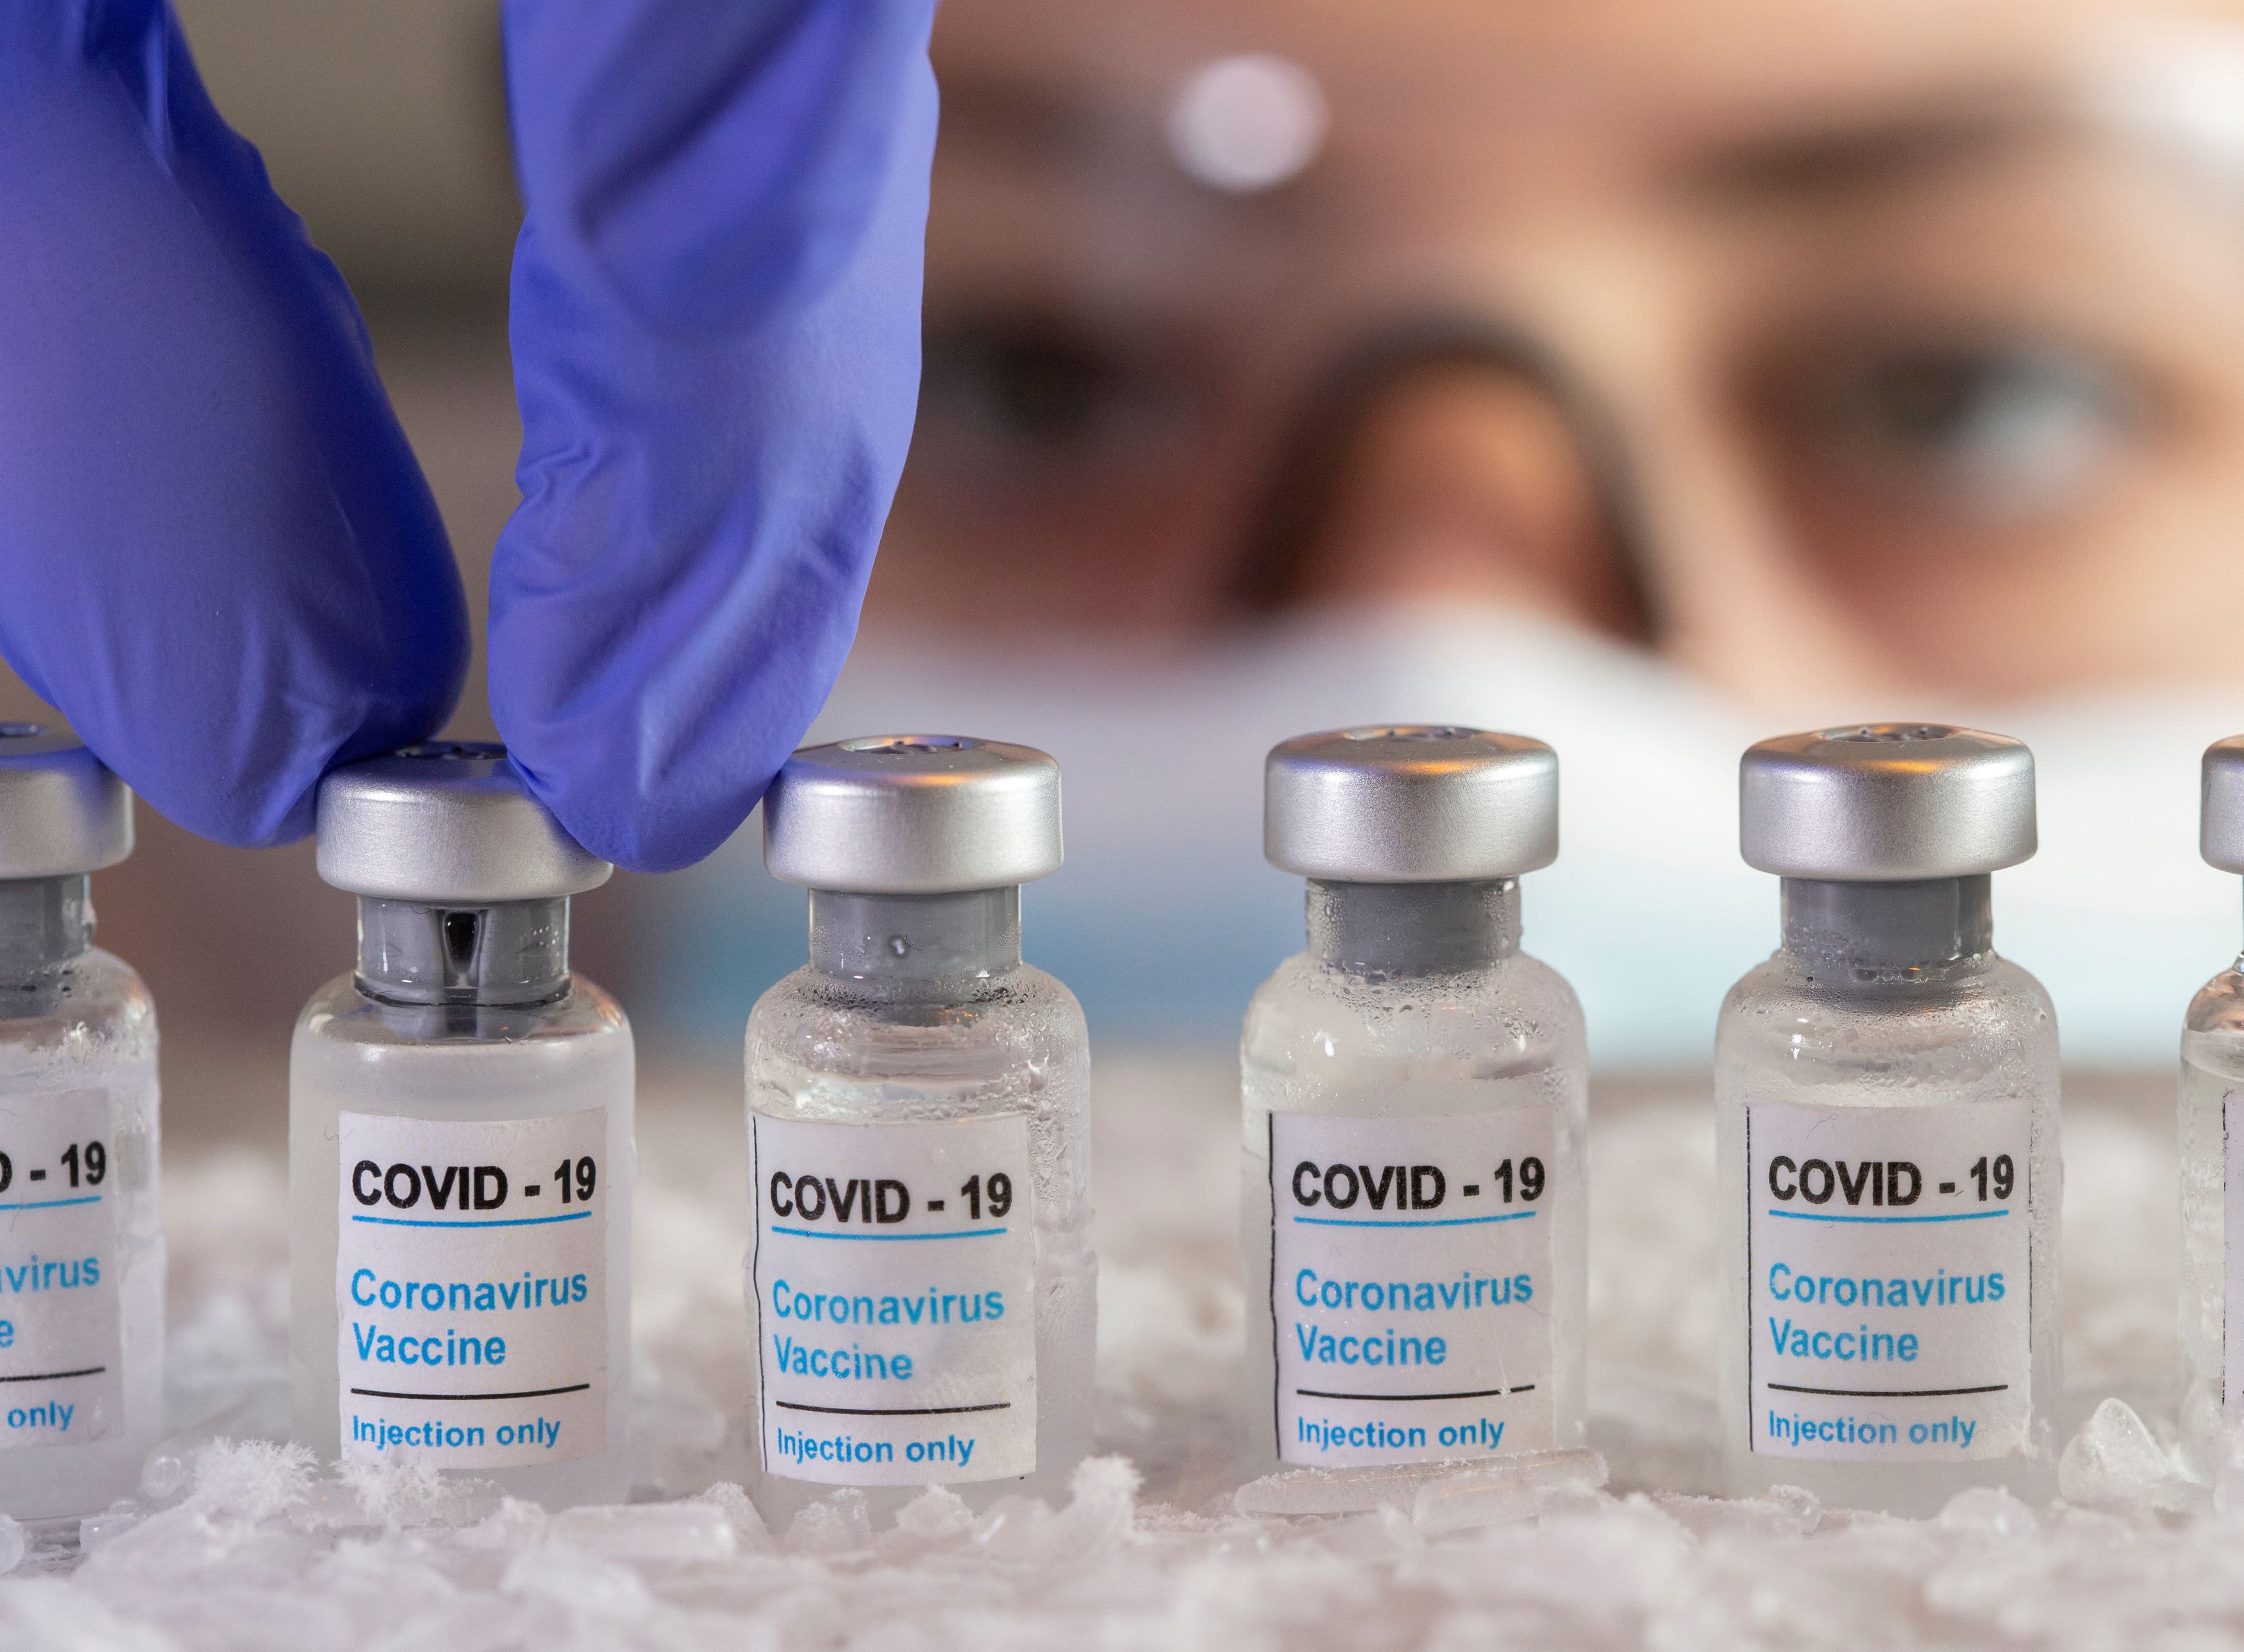 covid vaccine: fda may authorize pfizer's this week